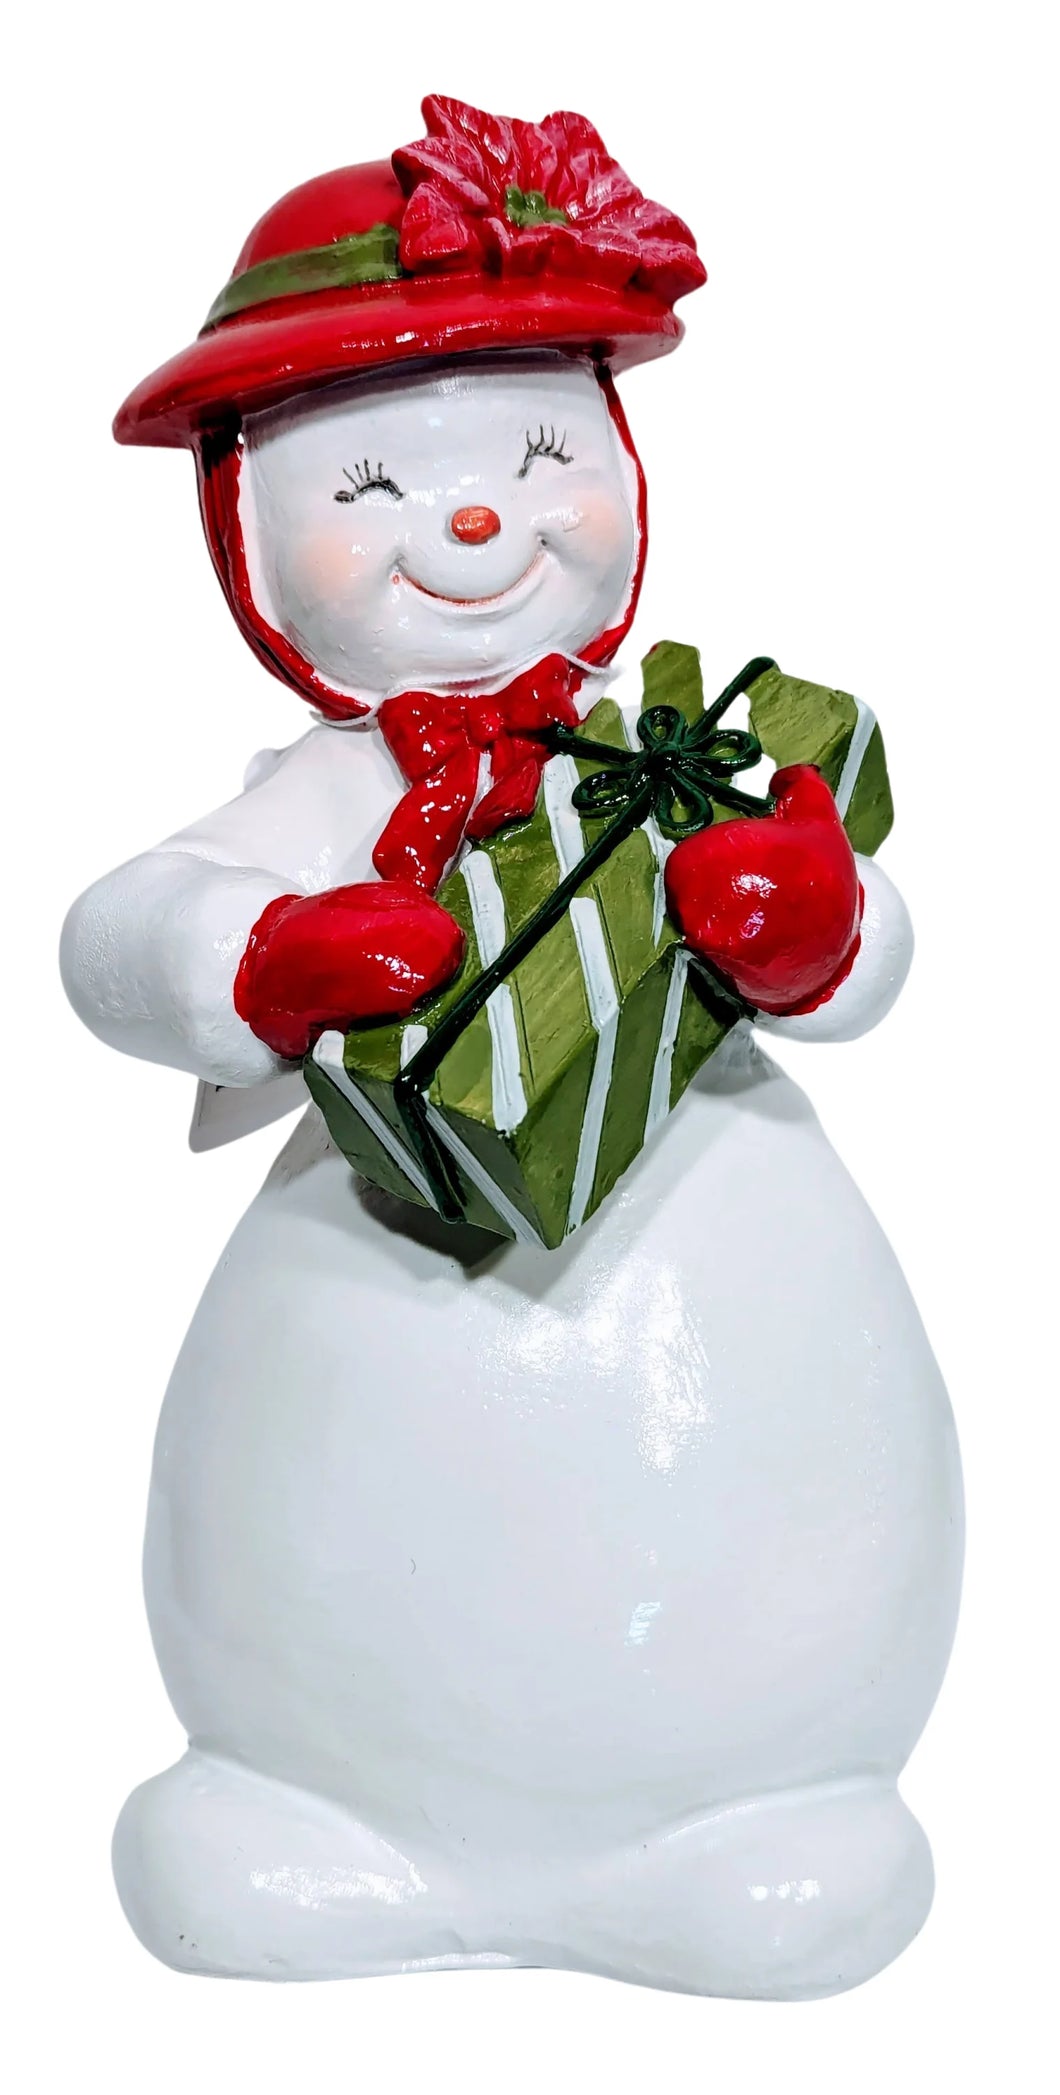 Snowman Figurine Wearing Red Hat & Holding a Christmas Gift